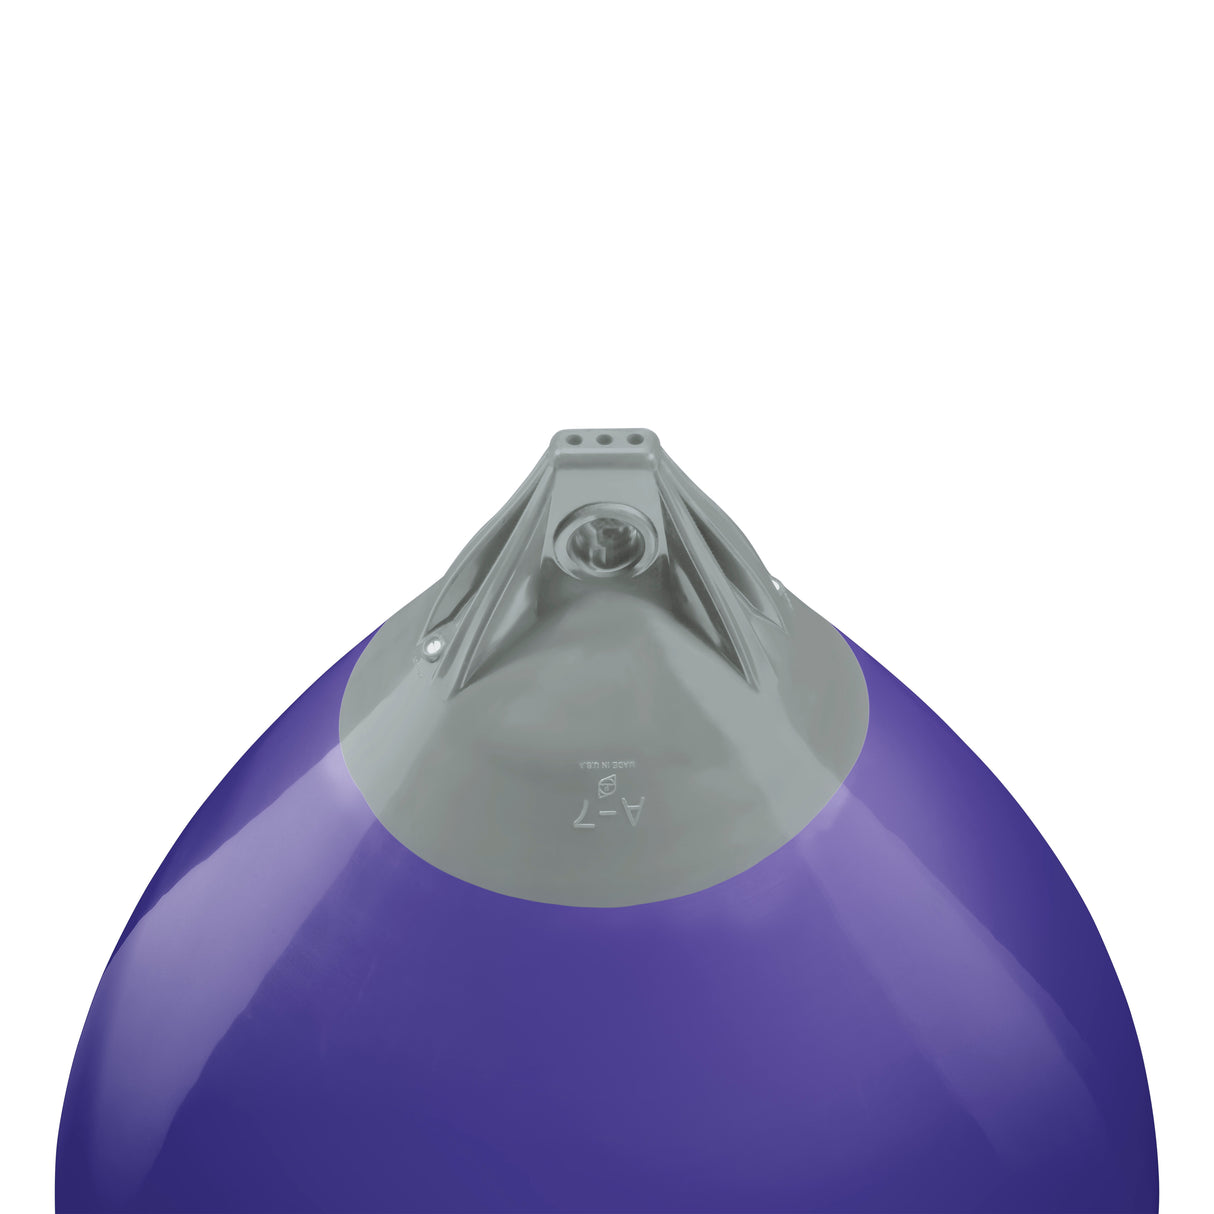 Purple buoy with Grey-Top, Polyform A-7 angled shot